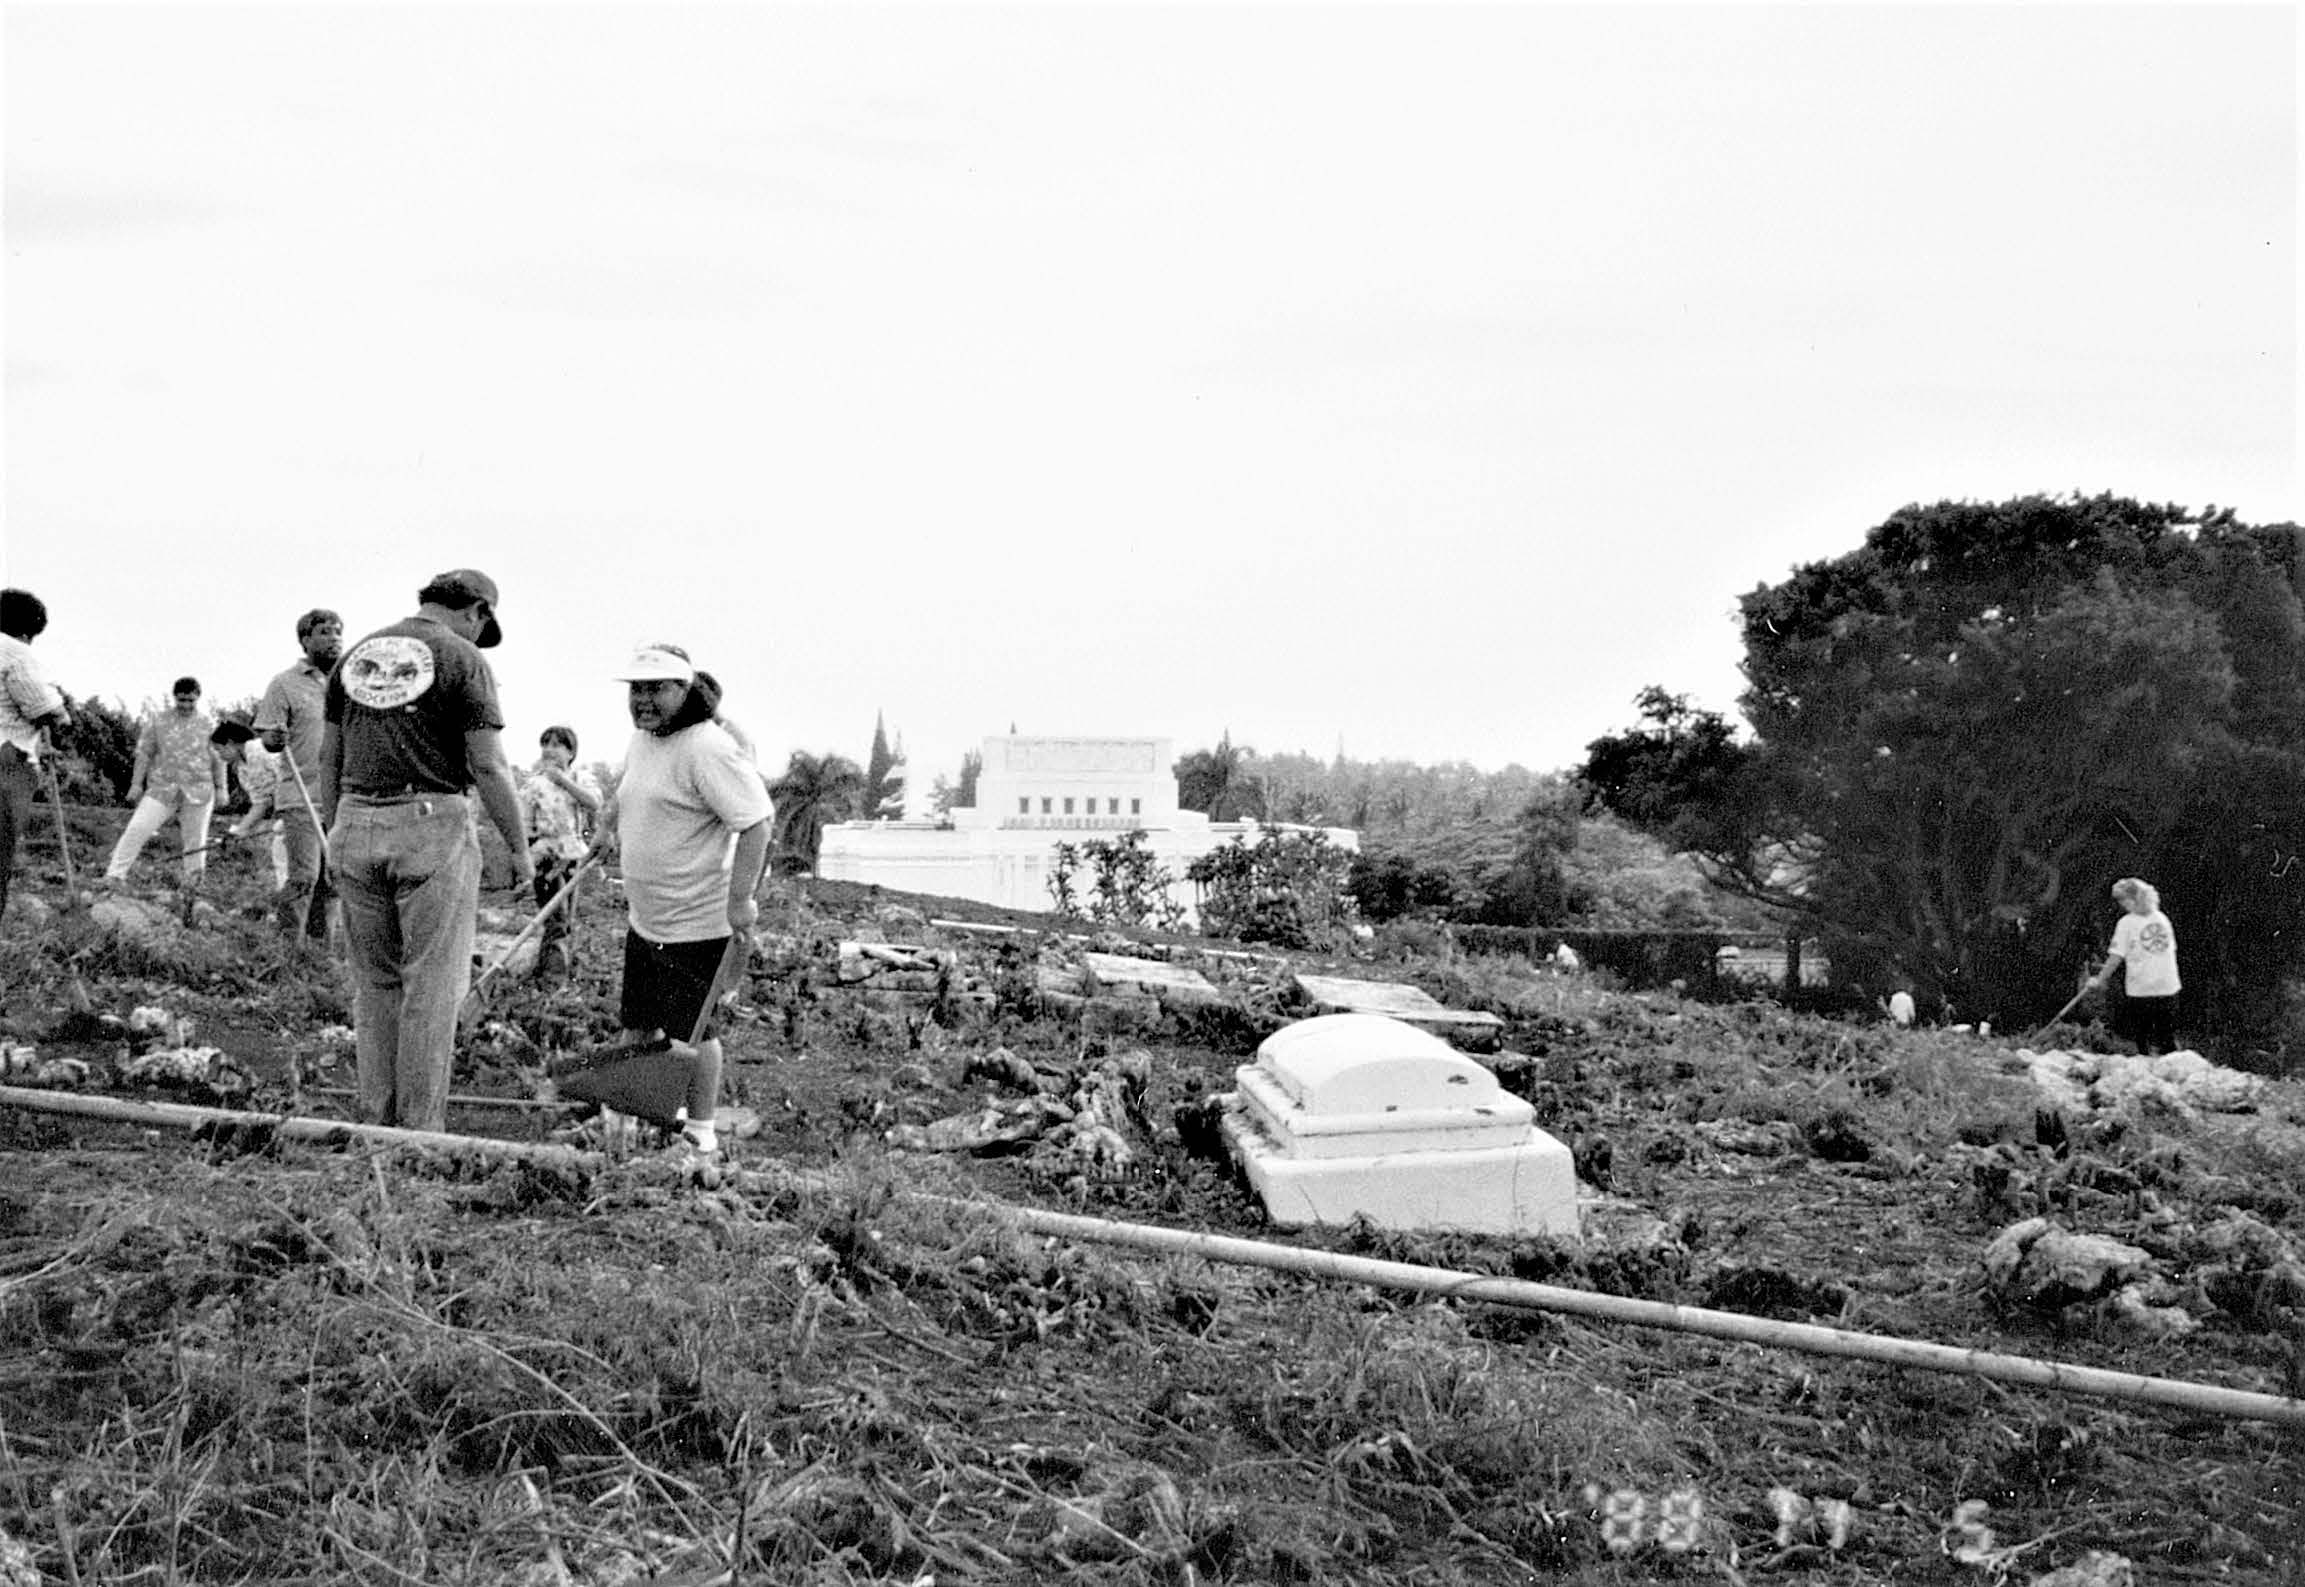 Efforts starting in 1987 to restore the long-overgrown area behind the temple (known as “Temple Hill”) included the restoration of the cemetery where a number of Lāʻie’s pioneers were buried. Courtesy of BYU–Hawaii Archives.